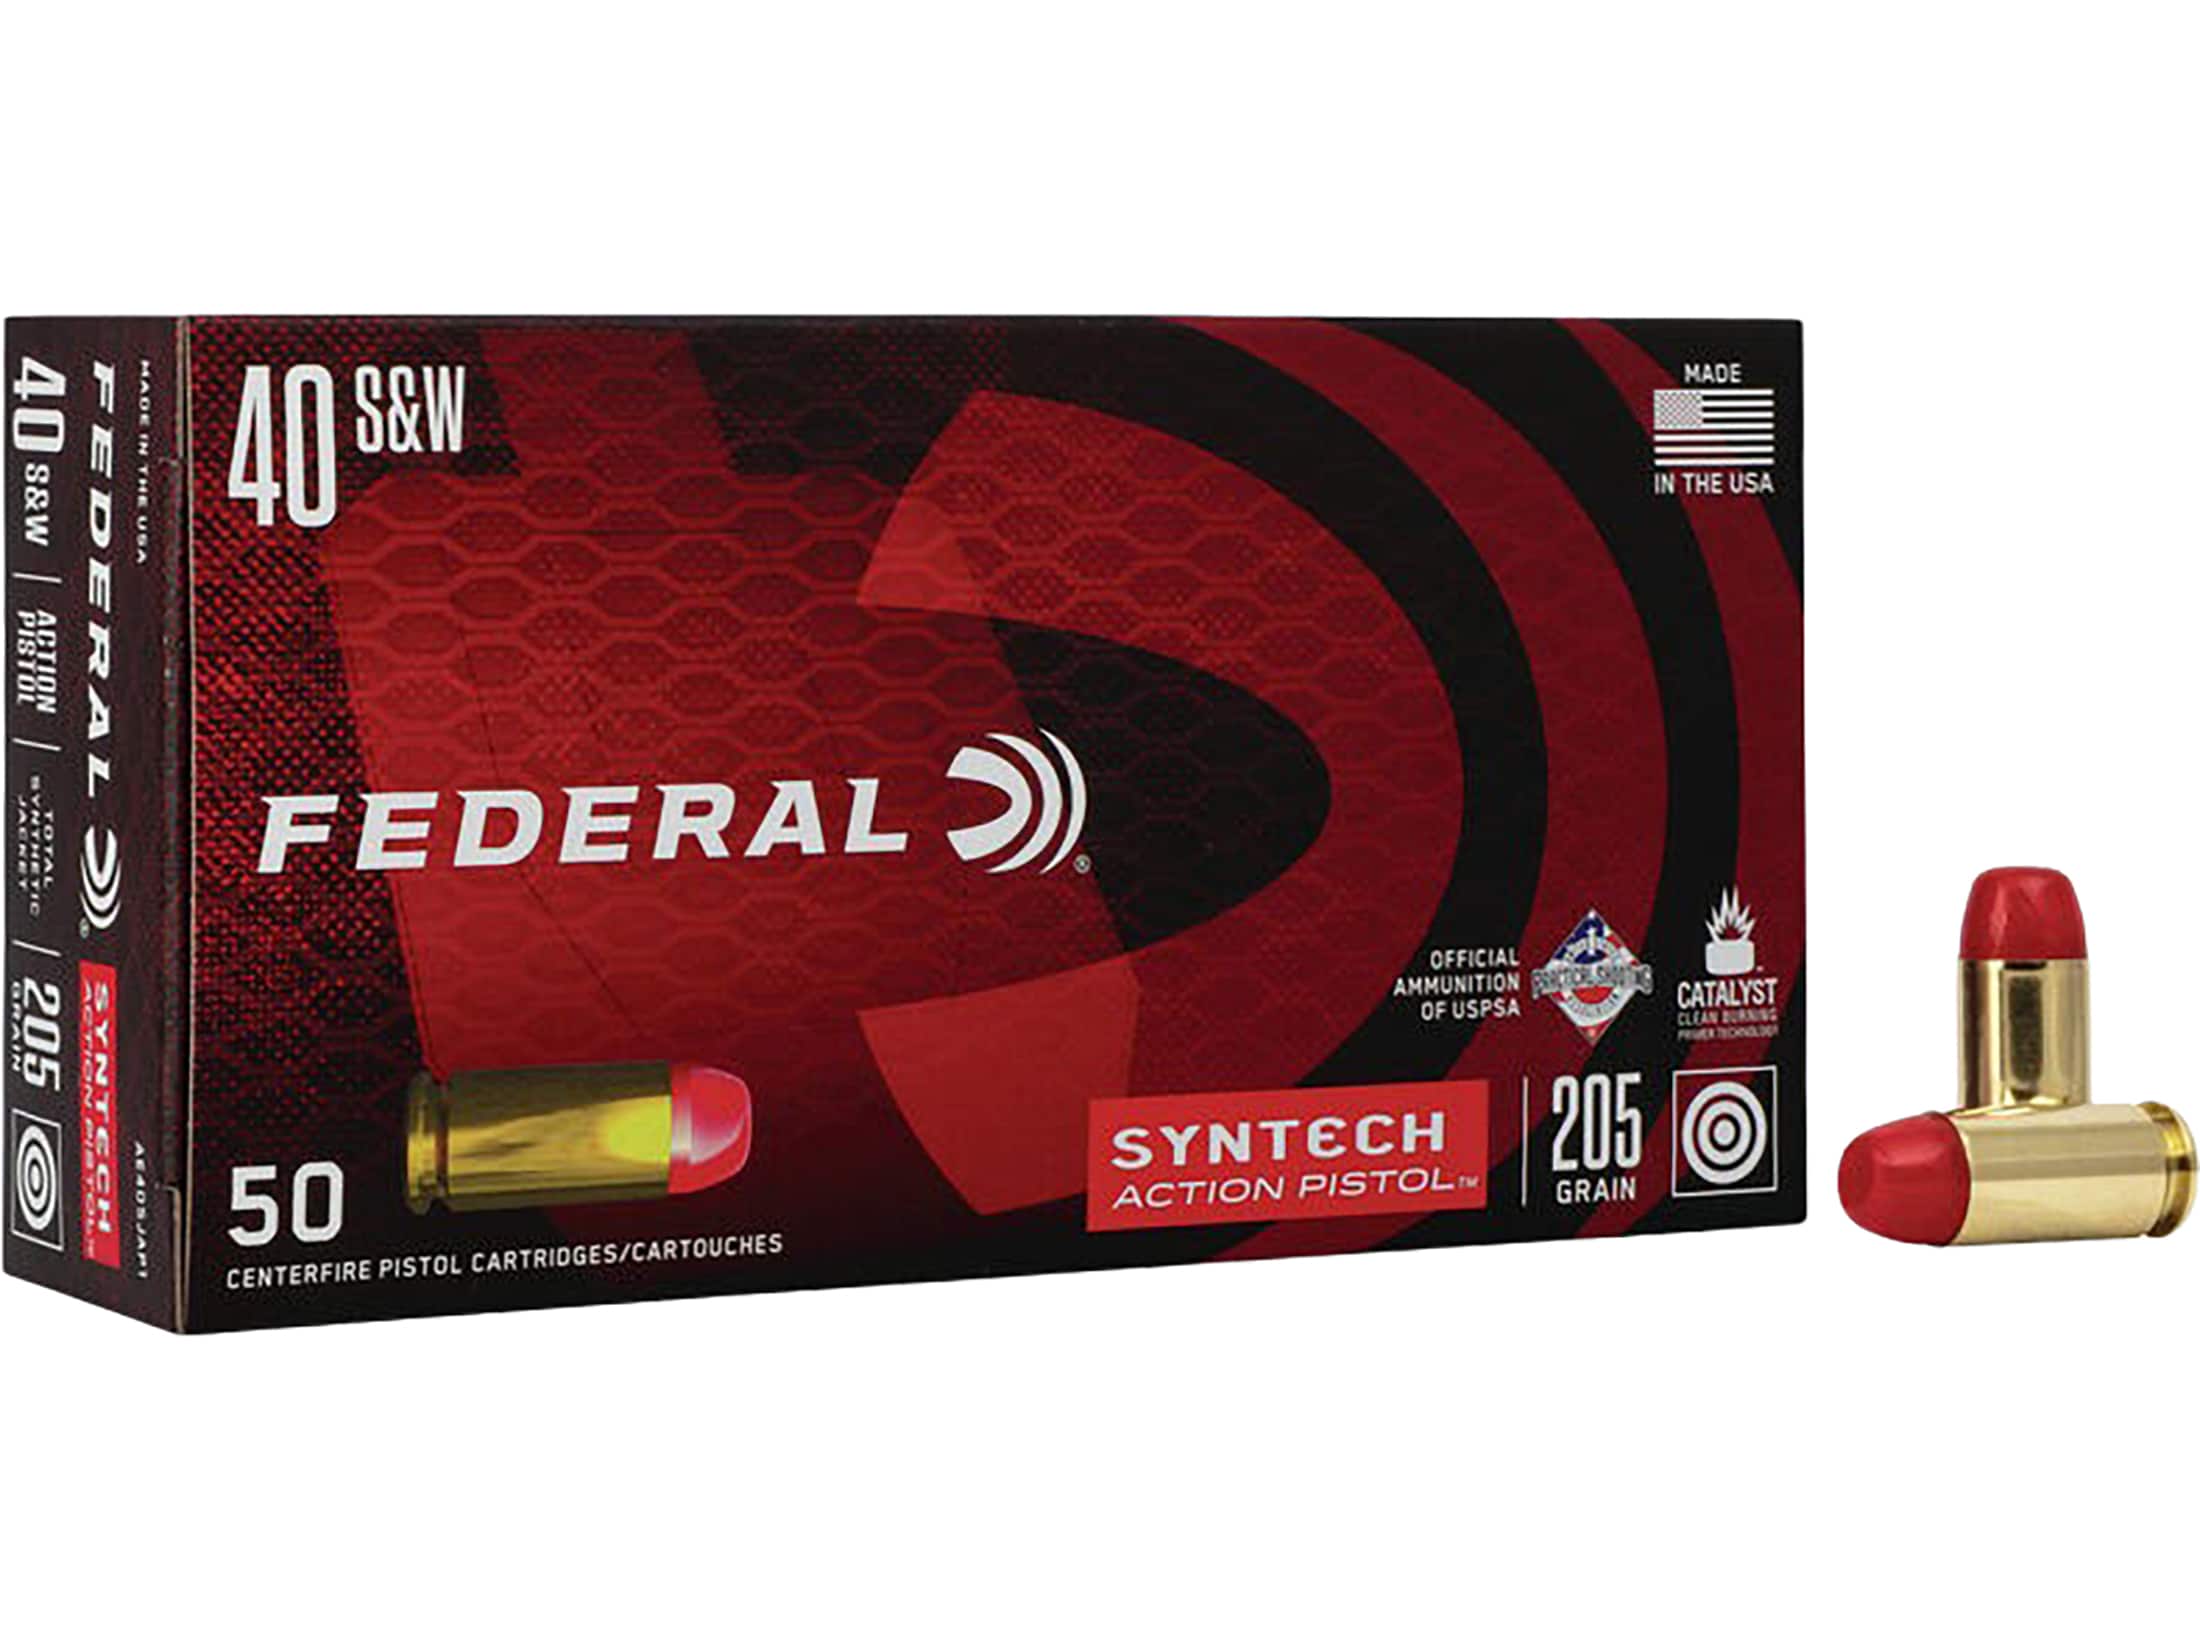 Federal Syntech 40 S&W Ammo 205 Grain Federal TSJ Total Synthetic